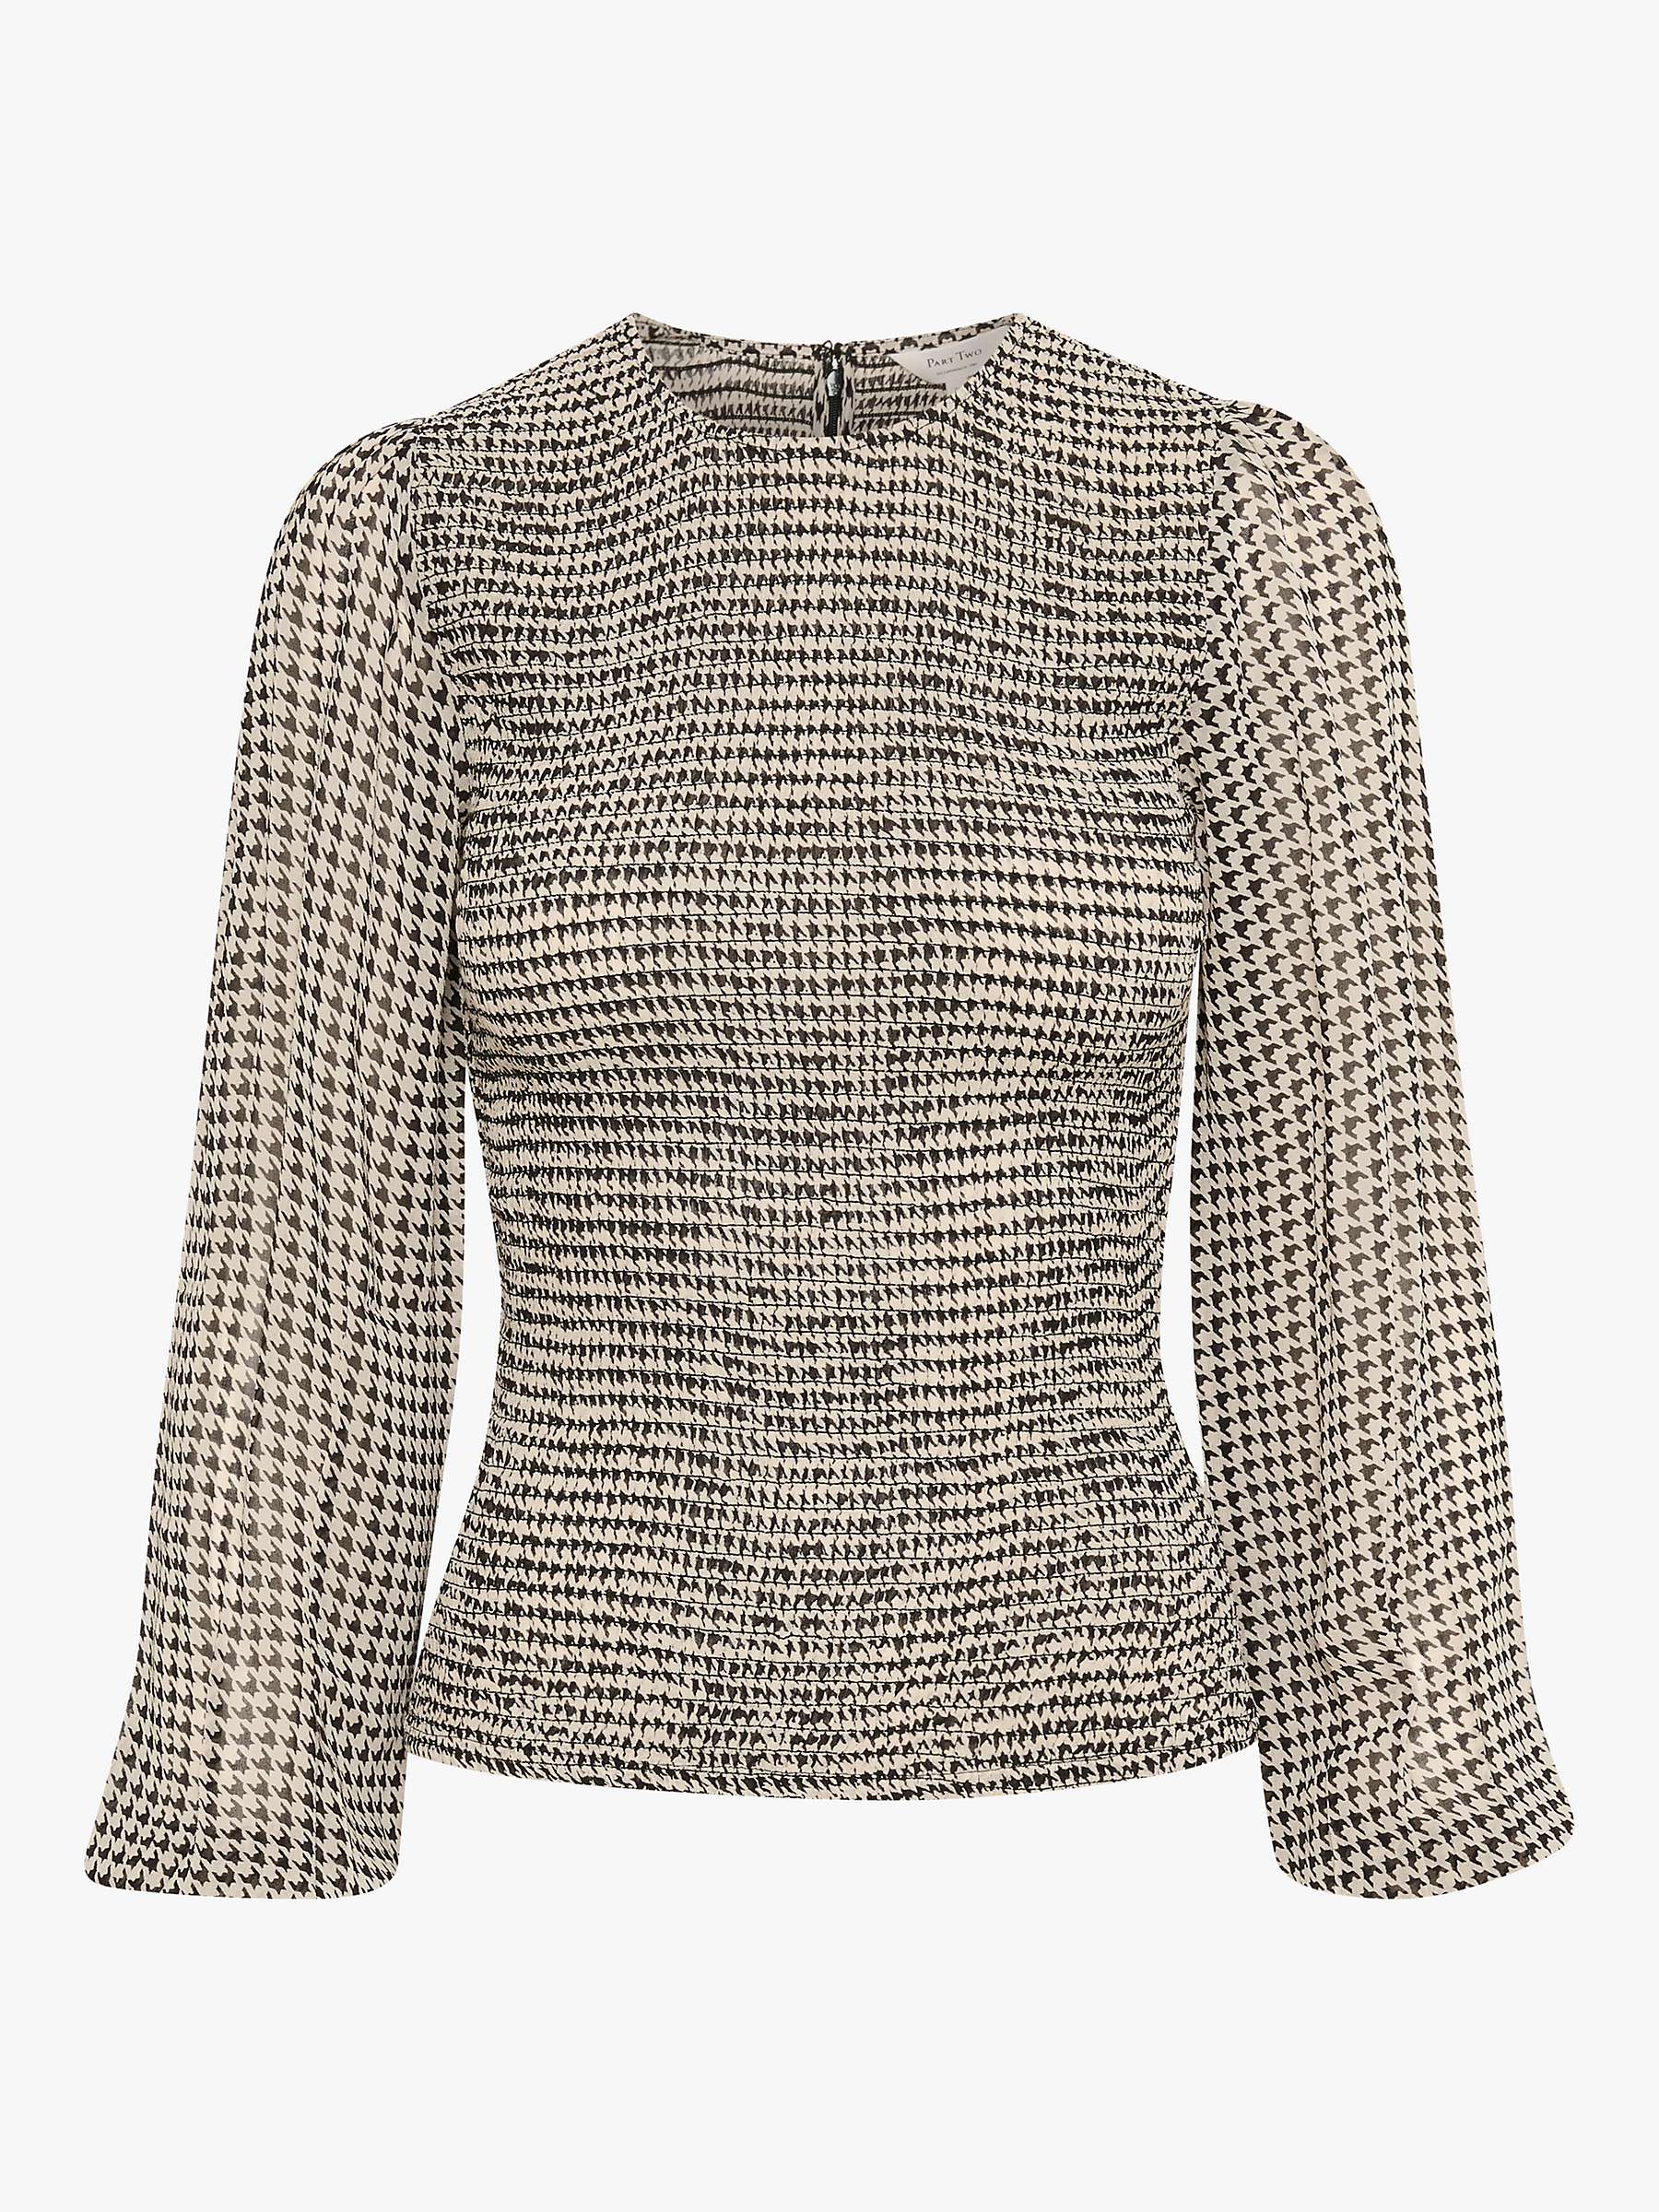 Buy Part Two Thira Houndstooth Blouse, Multi Online at johnlewis.com